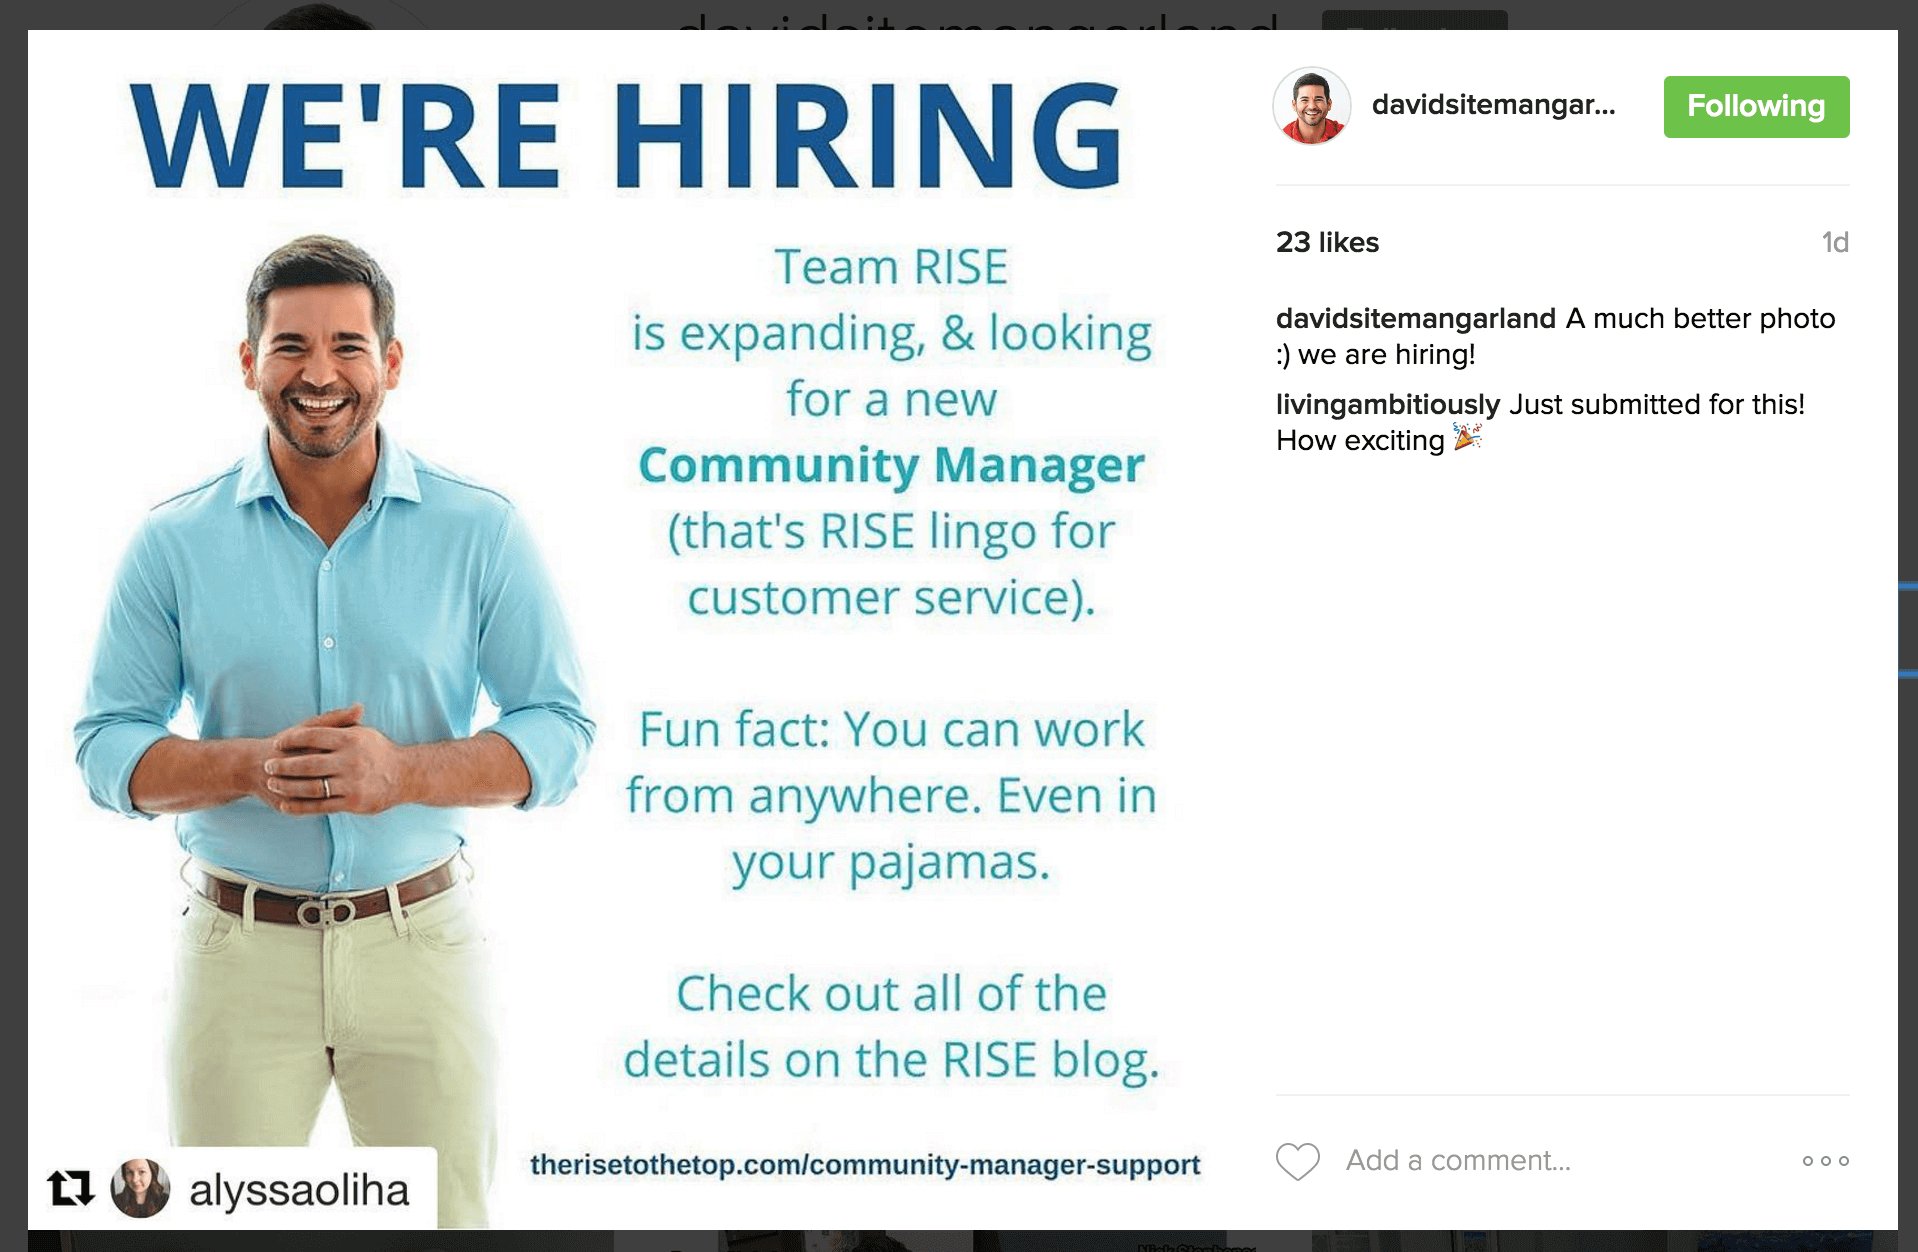 Screenshot of an Instagram post with a photo of David and the text "Team RISE is expanding and looking for a new Community Manager (that's RISE lingo for customer service). Fun fact: You can work from anywhere. Even in your pajamas. Check out all of the details on the RISE blog."